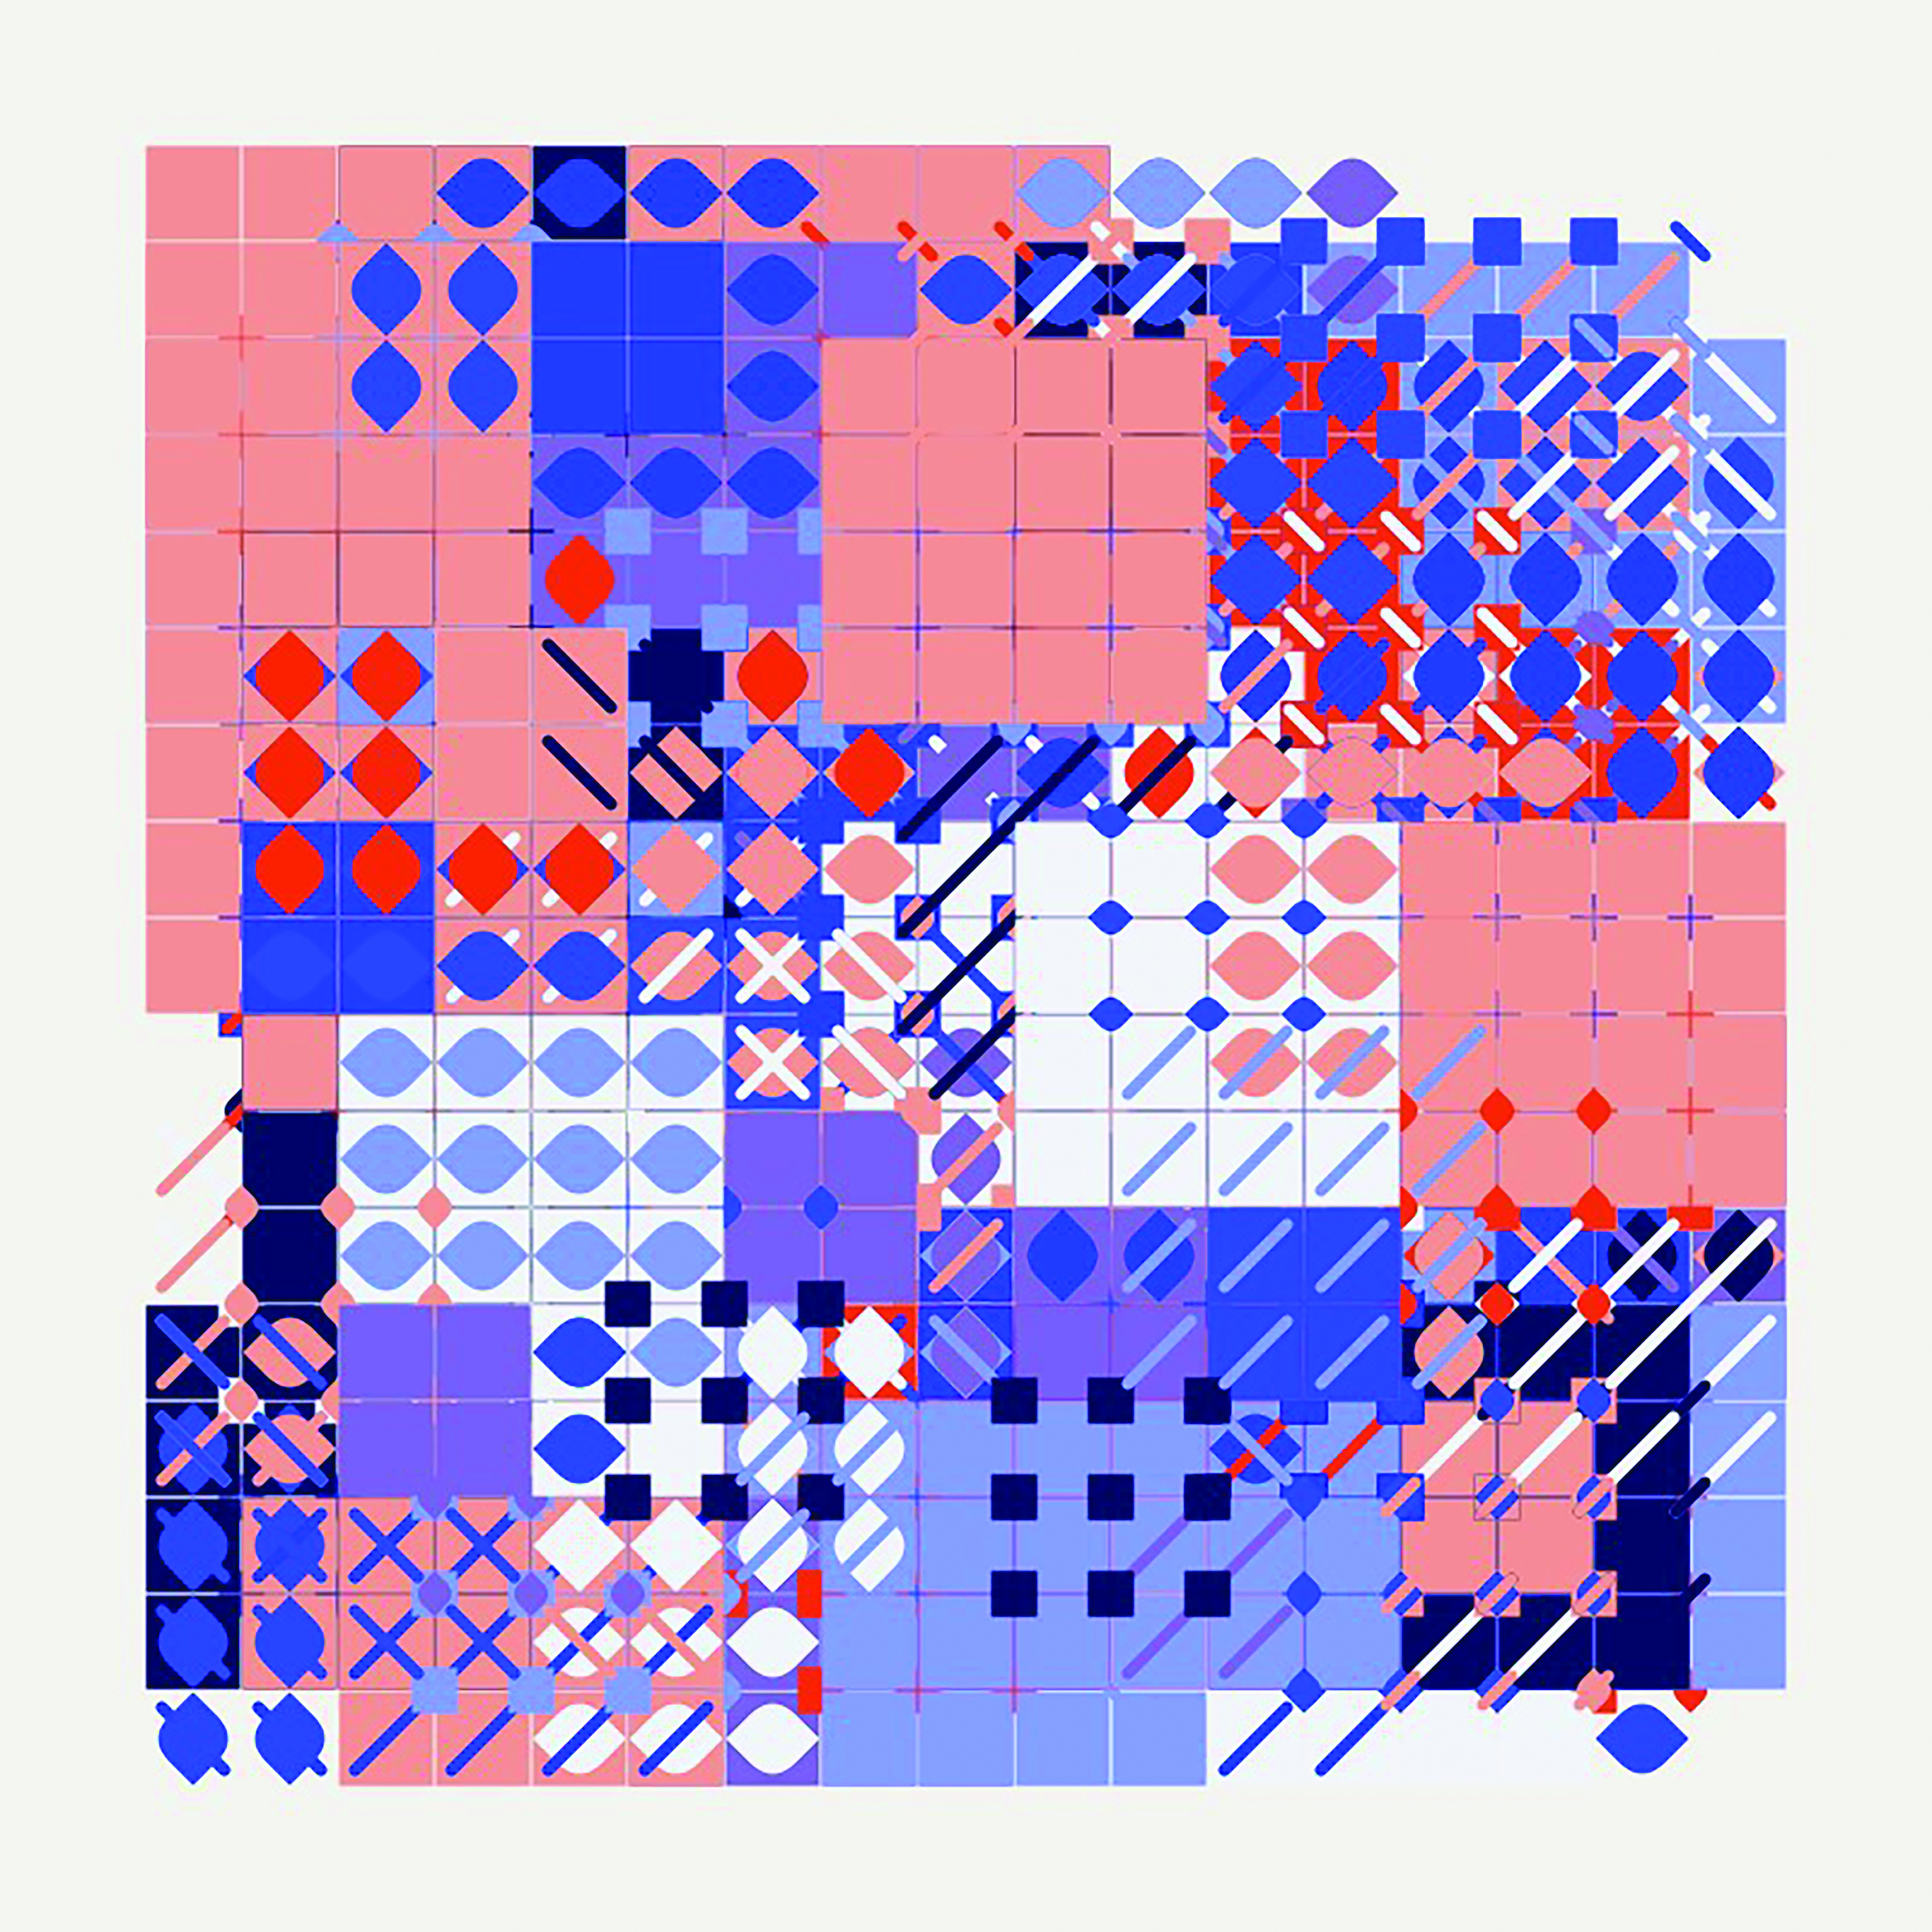 A square-shaped generative art piece of with a grid of shapes colored blue, red, and purple.